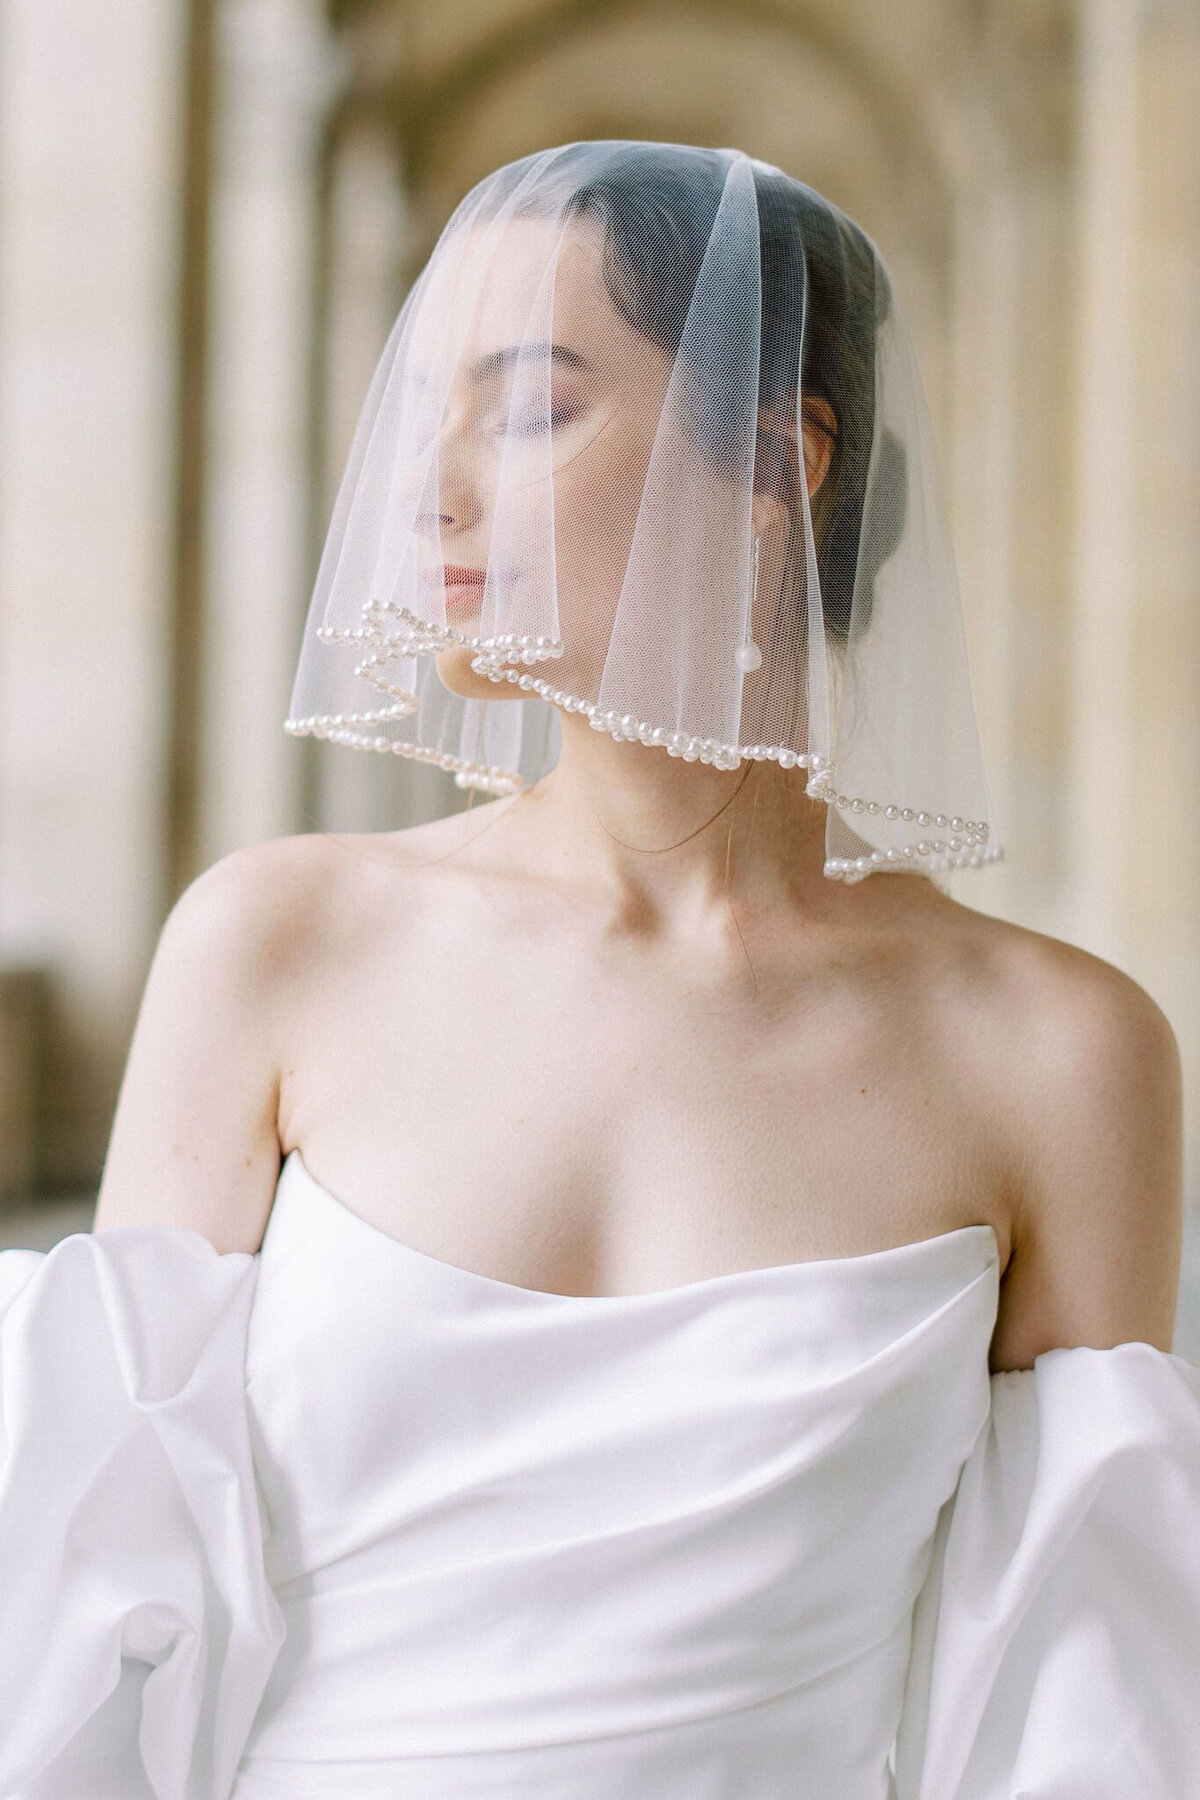 Vintage-inspired short veil by Blair Nadeau Bridal Adornments, romantic and modern wedding jewelry based in Brampton.  Featured on the Brontë Bride Vendor Guide.